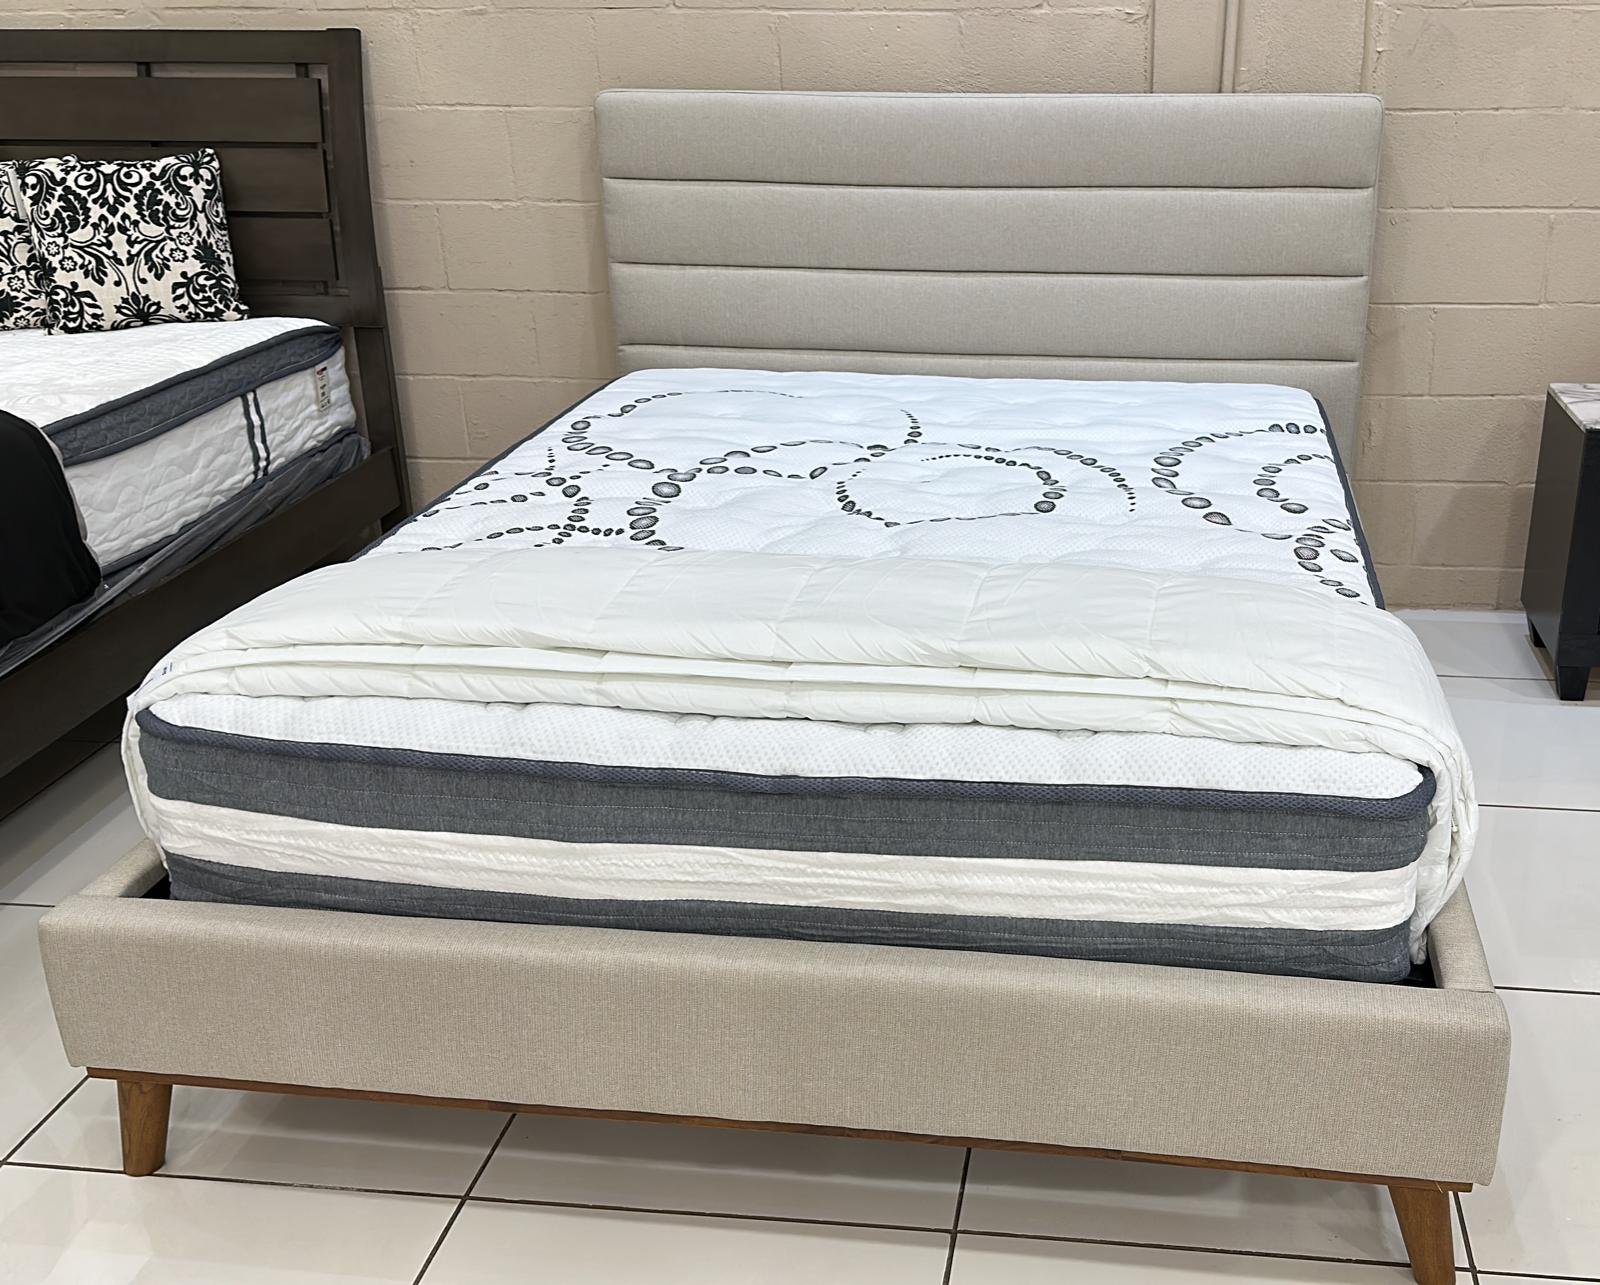 BBT-6803 - King Size Bed - 43777